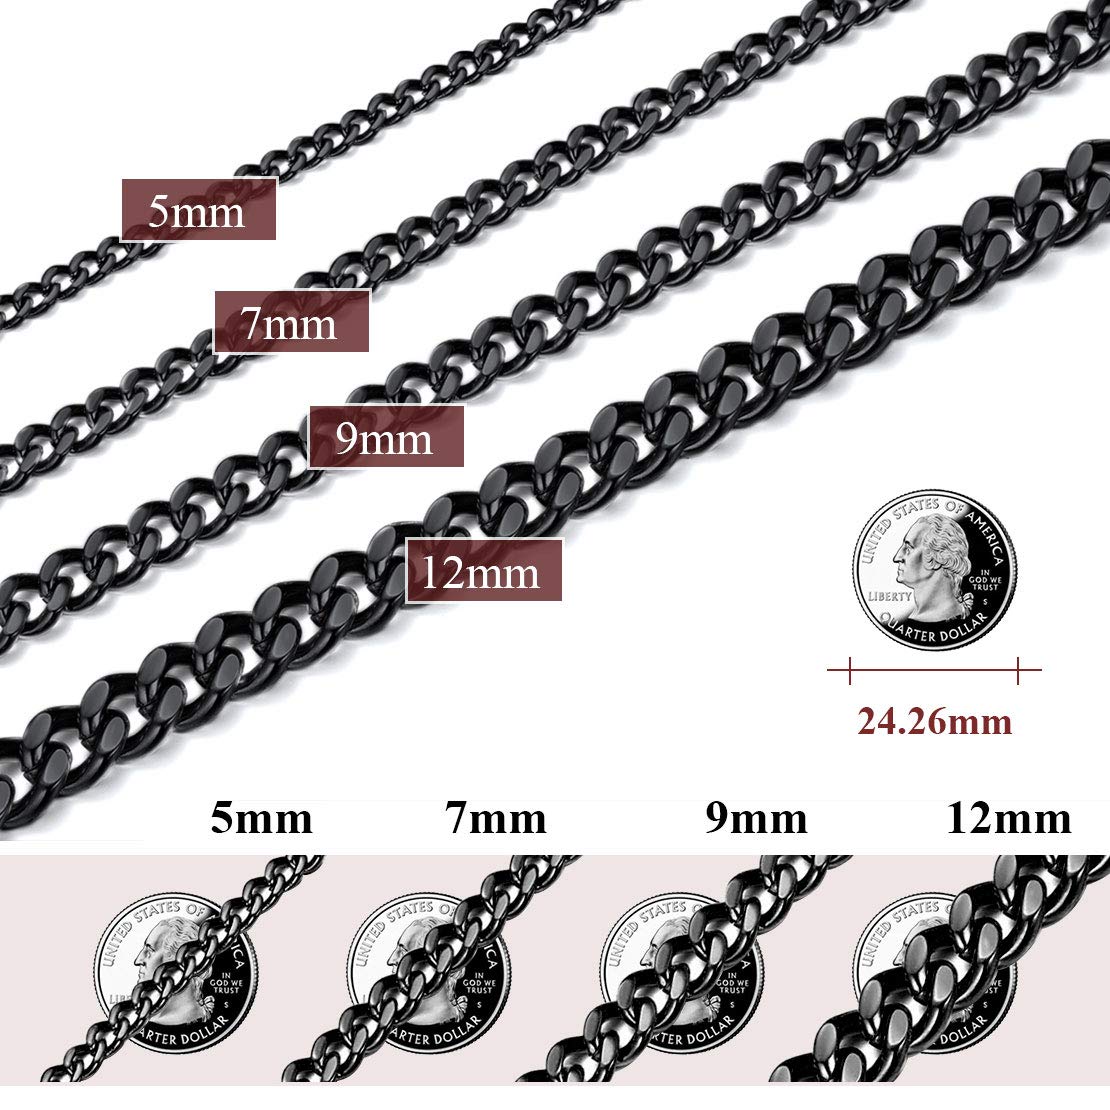 FindChic Men Curb Chain Necklace 18K Gold Plated/Stainless Steel/Black Chunky Double Tight Cuban Link Hip Hop Neck Chains for Men Boys 3.5MM/5MM/6MM/7MM/9MM/12MM 14''-30'' 8 Length Options (Send Gift Box)